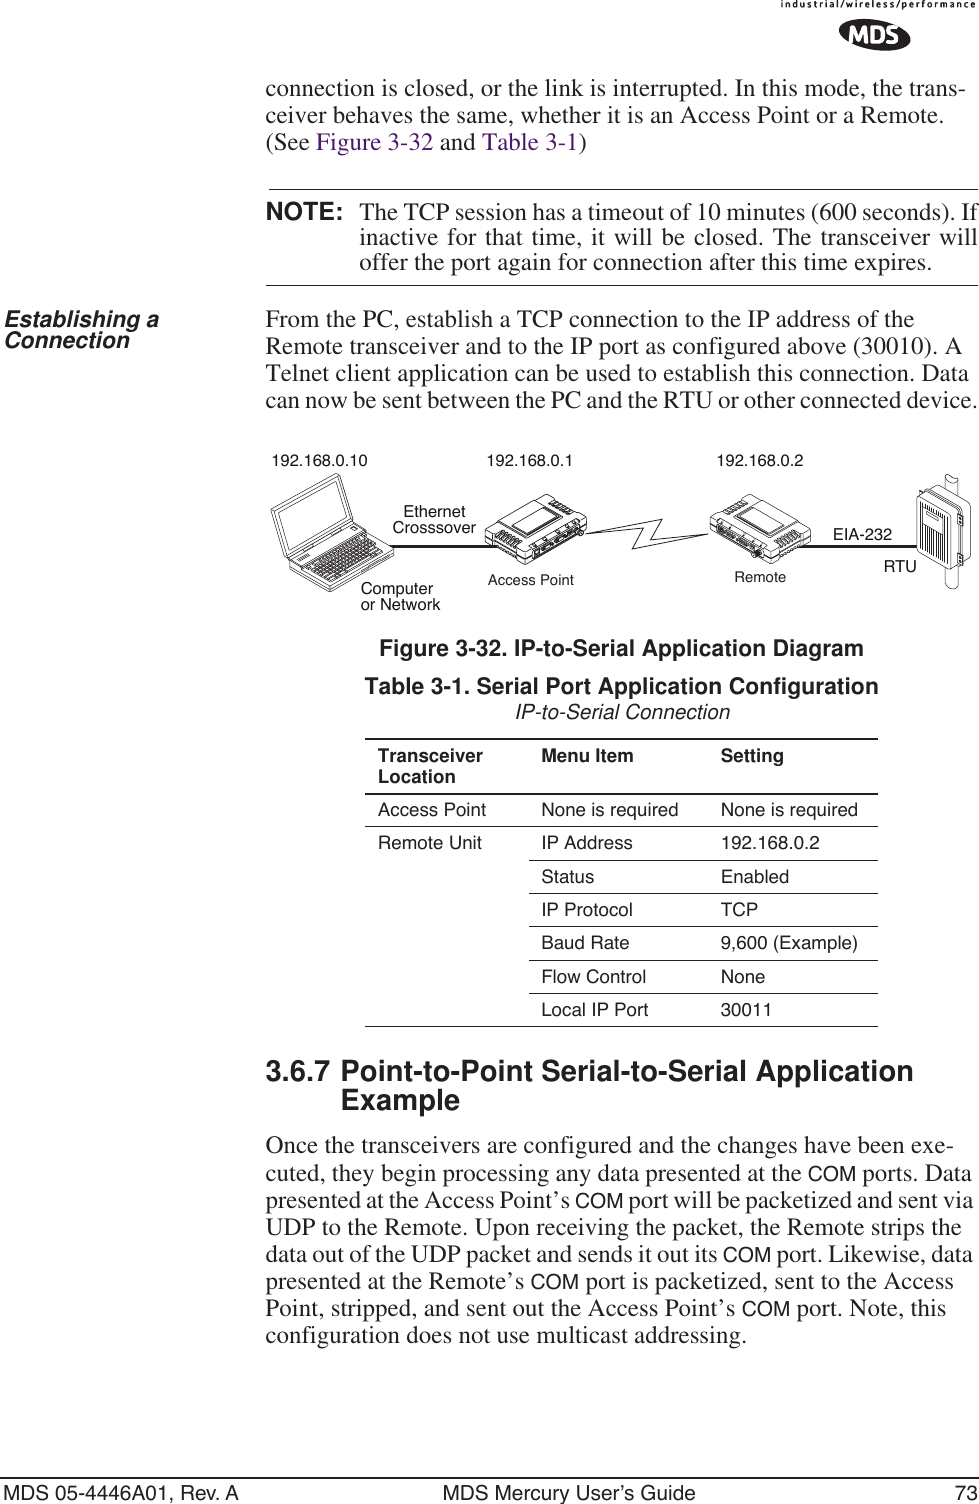 MDS 05-4446A01, Rev. A MDS Mercury User’s Guide 73connection is closed, or the link is interrupted. In this mode, the trans-ceiver behaves the same, whether it is an Access Point or a Remote. (See Figure 3-32 and Table 3-1) NOTE: The TCP session has a timeout of 10 minutes (600 seconds). Ifinactive for that time, it will be closed. The transceiver willoffer the port again for connection after this time expires.Establishing a Connection From the PC, establish a TCP connection to the IP address of the Remote transceiver and to the IP port as configured above (30010). A Telnet client application can be used to establish this connection. Data can now be sent between the PC and the RTU or other connected device.Invisible place holderFigure 3-32. IP-to-Serial Application Diagram3.6.7 Point-to-Point Serial-to-Serial Application ExampleOnce the transceivers are configured and the changes have been exe-cuted, they begin processing any data presented at the COM ports. Data presented at the Access Point’s COM port will be packetized and sent via UDP to the Remote. Upon receiving the packet, the Remote strips the data out of the UDP packet and sends it out its COM port. Likewise, data presented at the Remote’s COM port is packetized, sent to the Access Point, stripped, and sent out the Access Point’s COM port. Note, this configuration does not use multicast addressing.EthernetCrosssoverRTUEIA-232Computeror Network192.168.0.10 192.168.0.1 192.168.0.2LANCOM1COM2PWRLINKRemoteAccess PointTable 3-1. Serial Port Application ConfigurationIP-to-Serial Connection Transceiver Location Menu Item SettingAccess Point None is required None is requiredRemote Unit IP Address 192.168.0.2Status EnabledIP Protocol TCPBaud Rate 9,600 (Example)Flow Control NoneLocal IP Port 30011